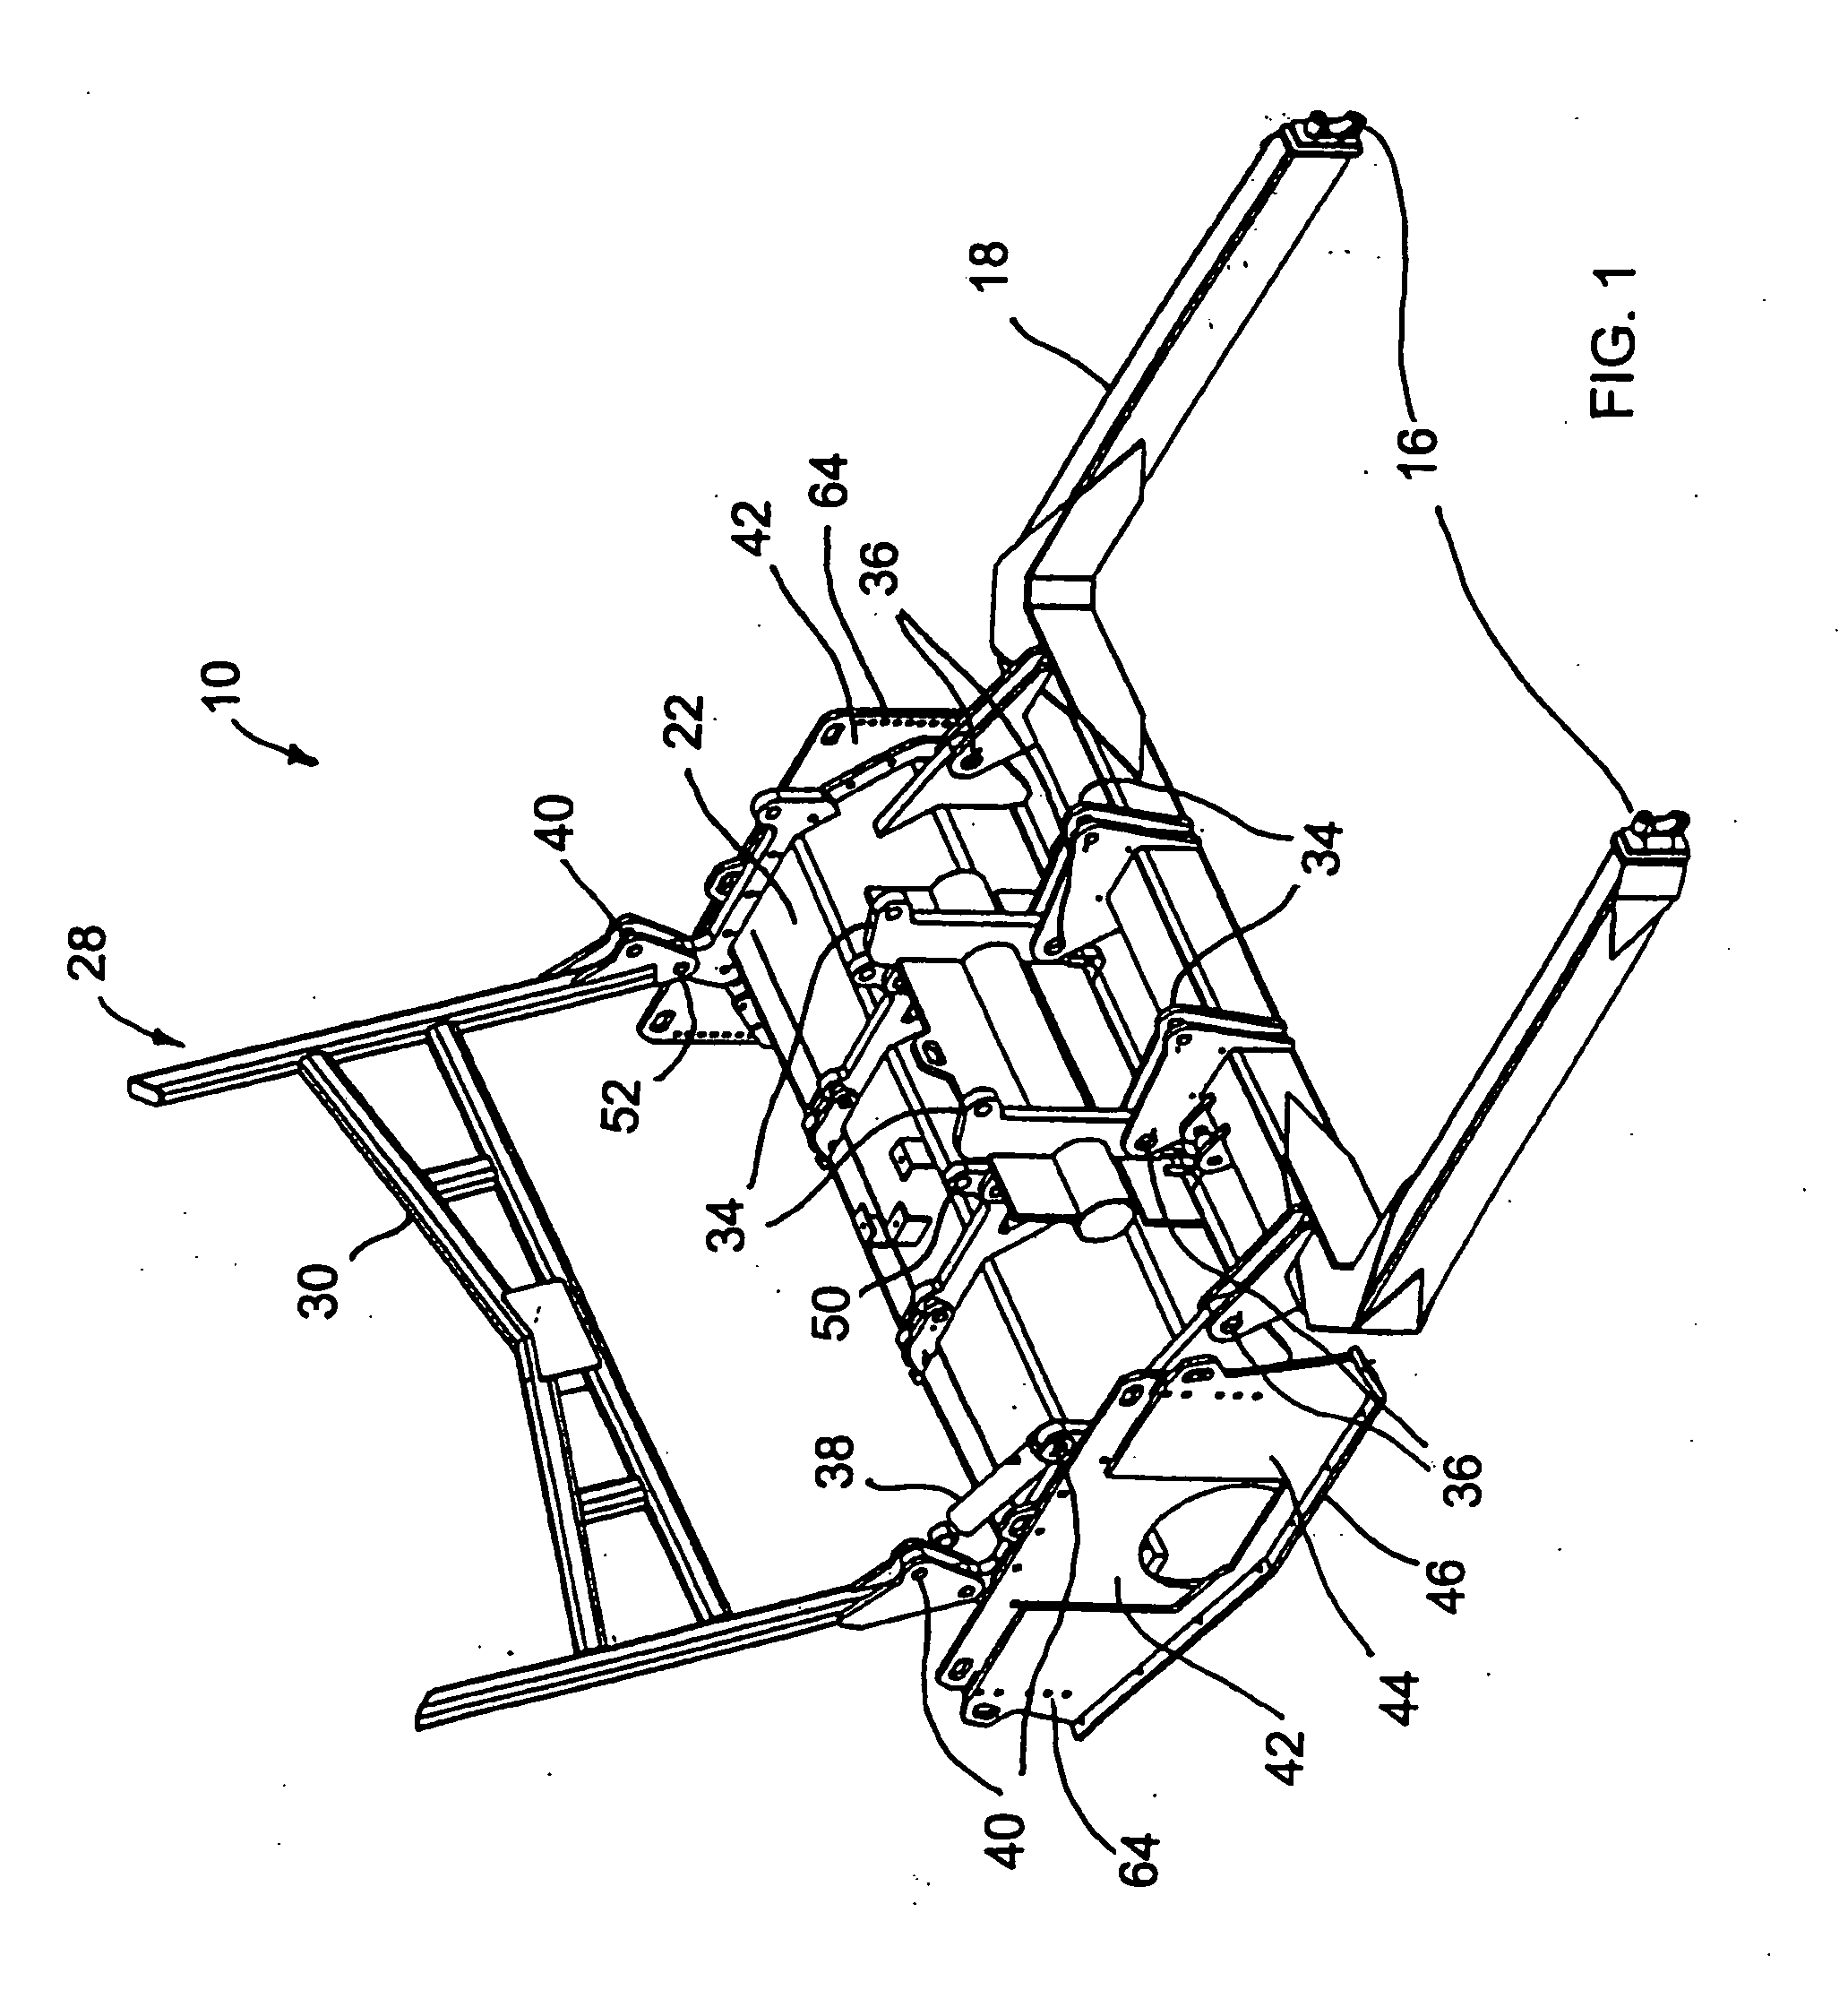 Ground-clearing apparatus